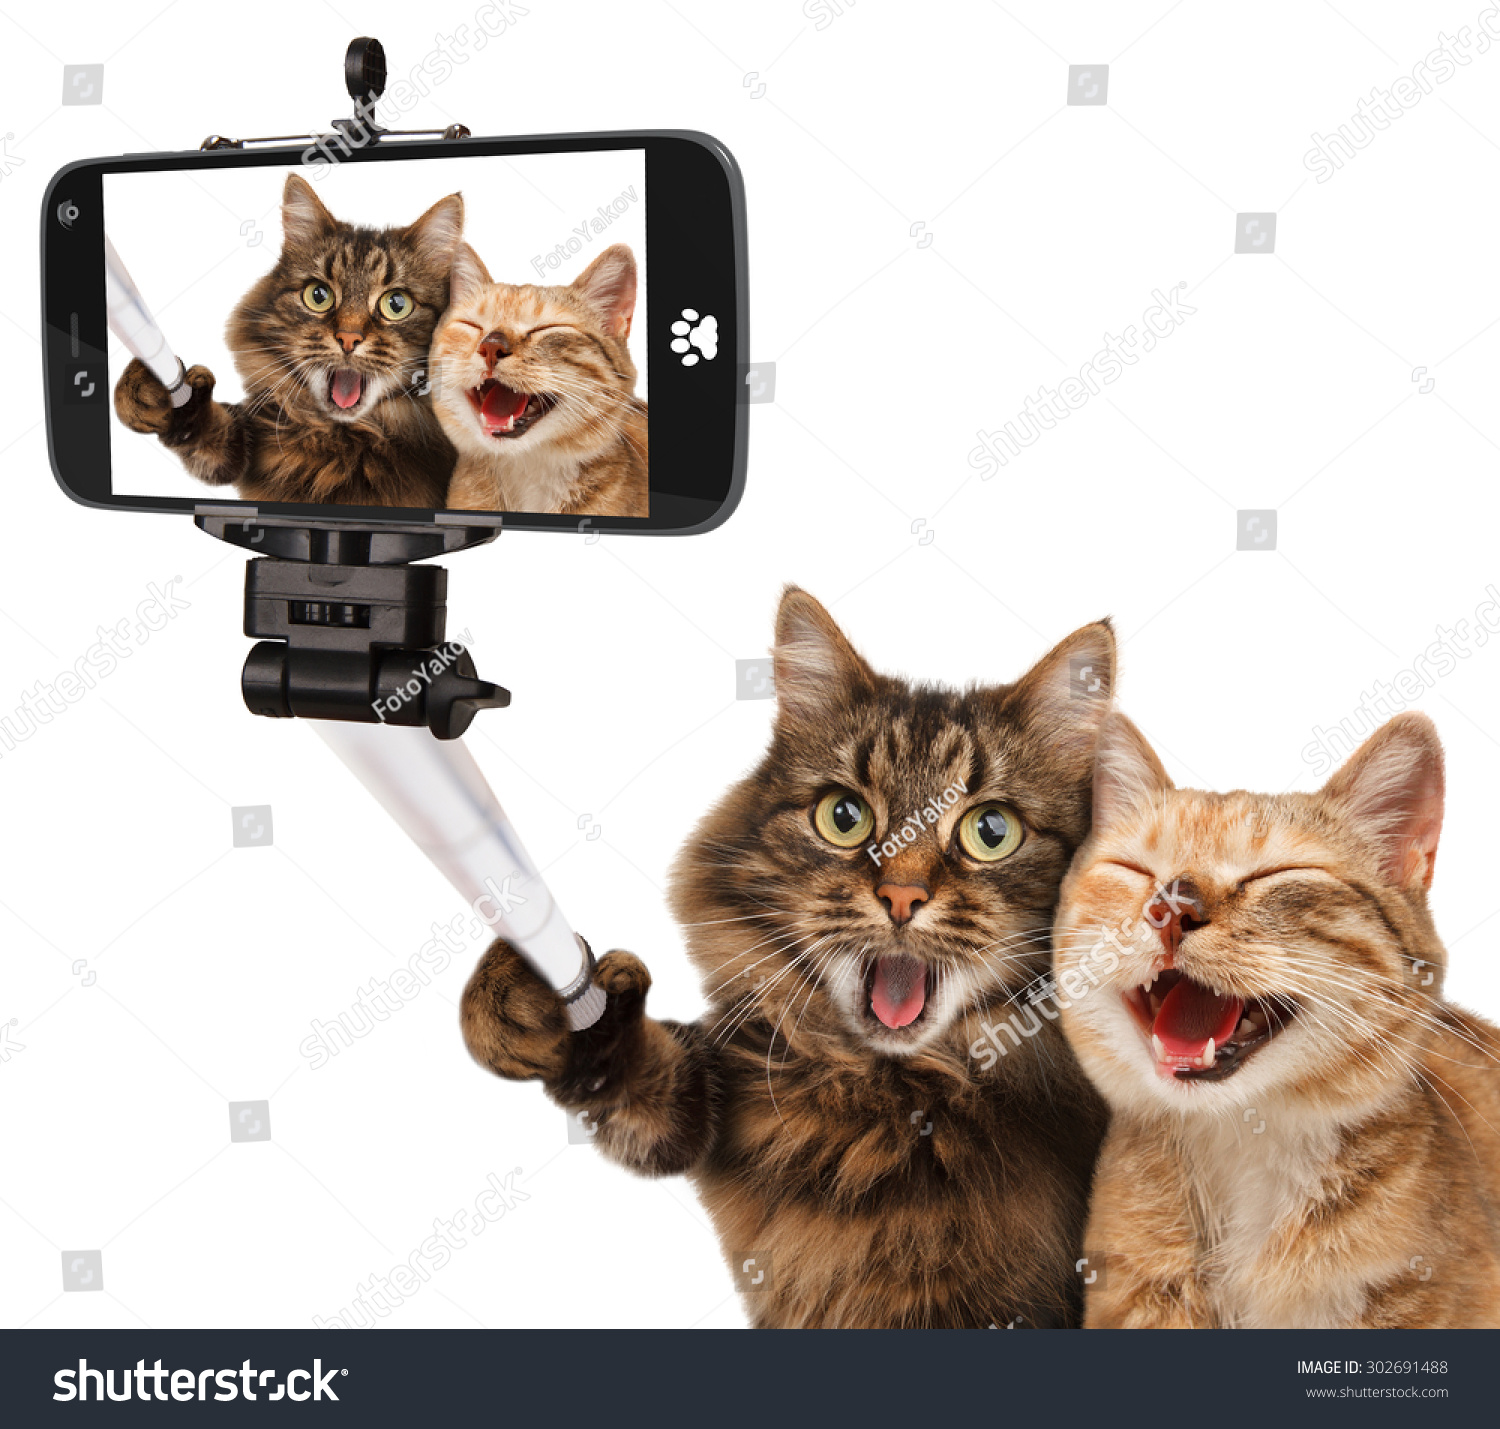 Funny cats - Self picture. Selfie stick in his hand.
Couple of cat taking a selfie together with smartphone camera #302691488